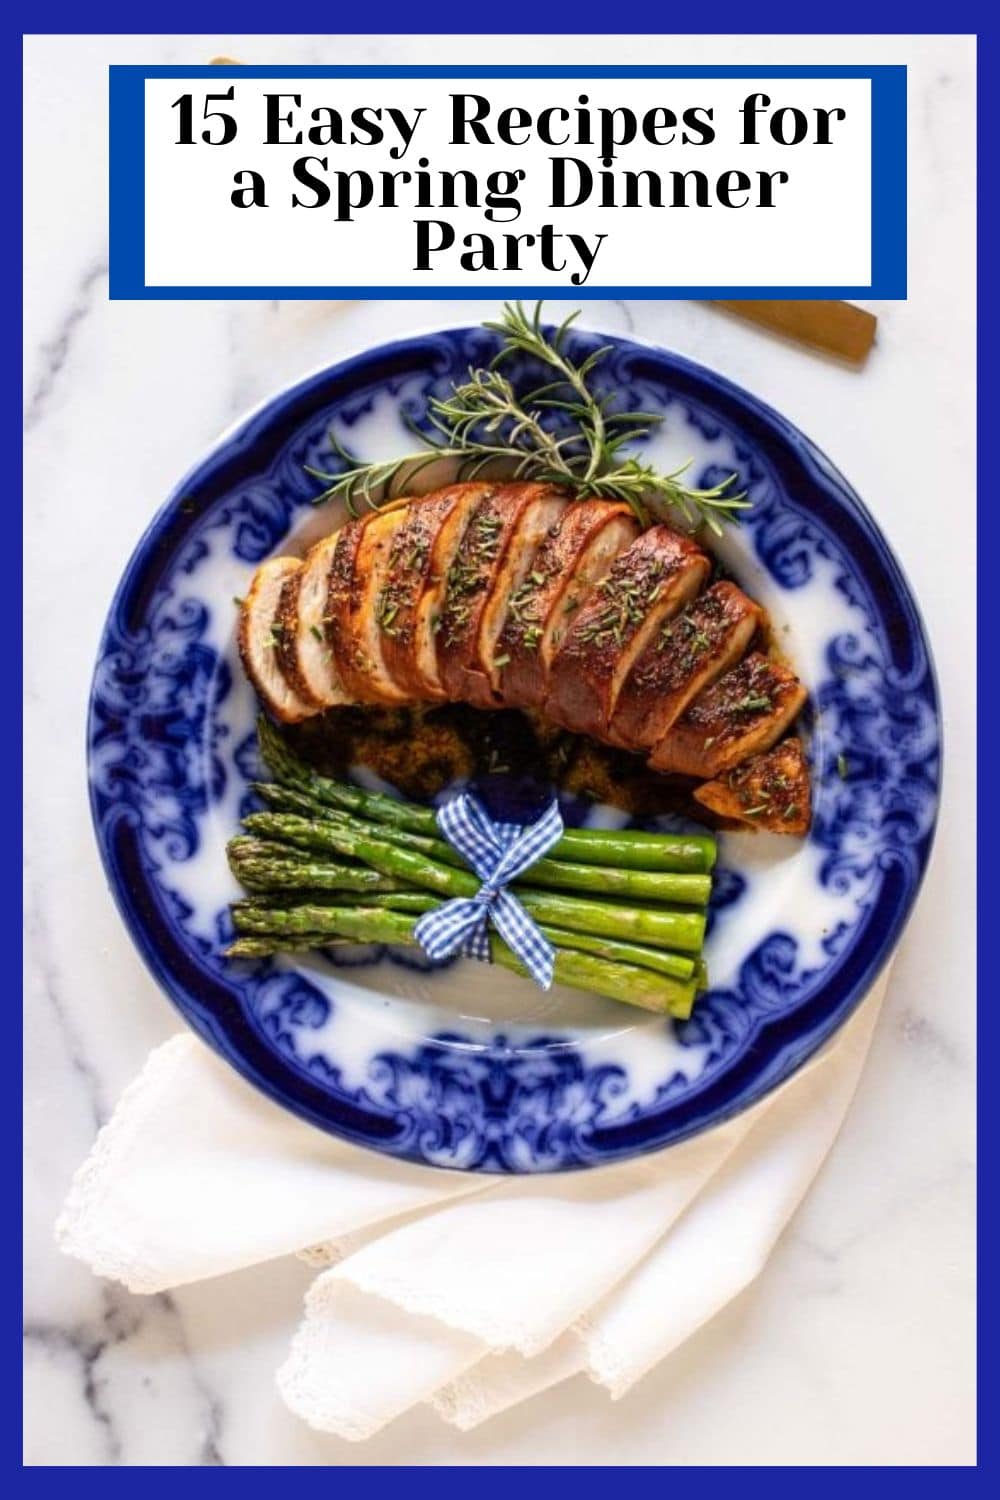 It\'s Spring - Let\'s Have a Dinner Party! 15 Easy Recipes to Celebrate the Season